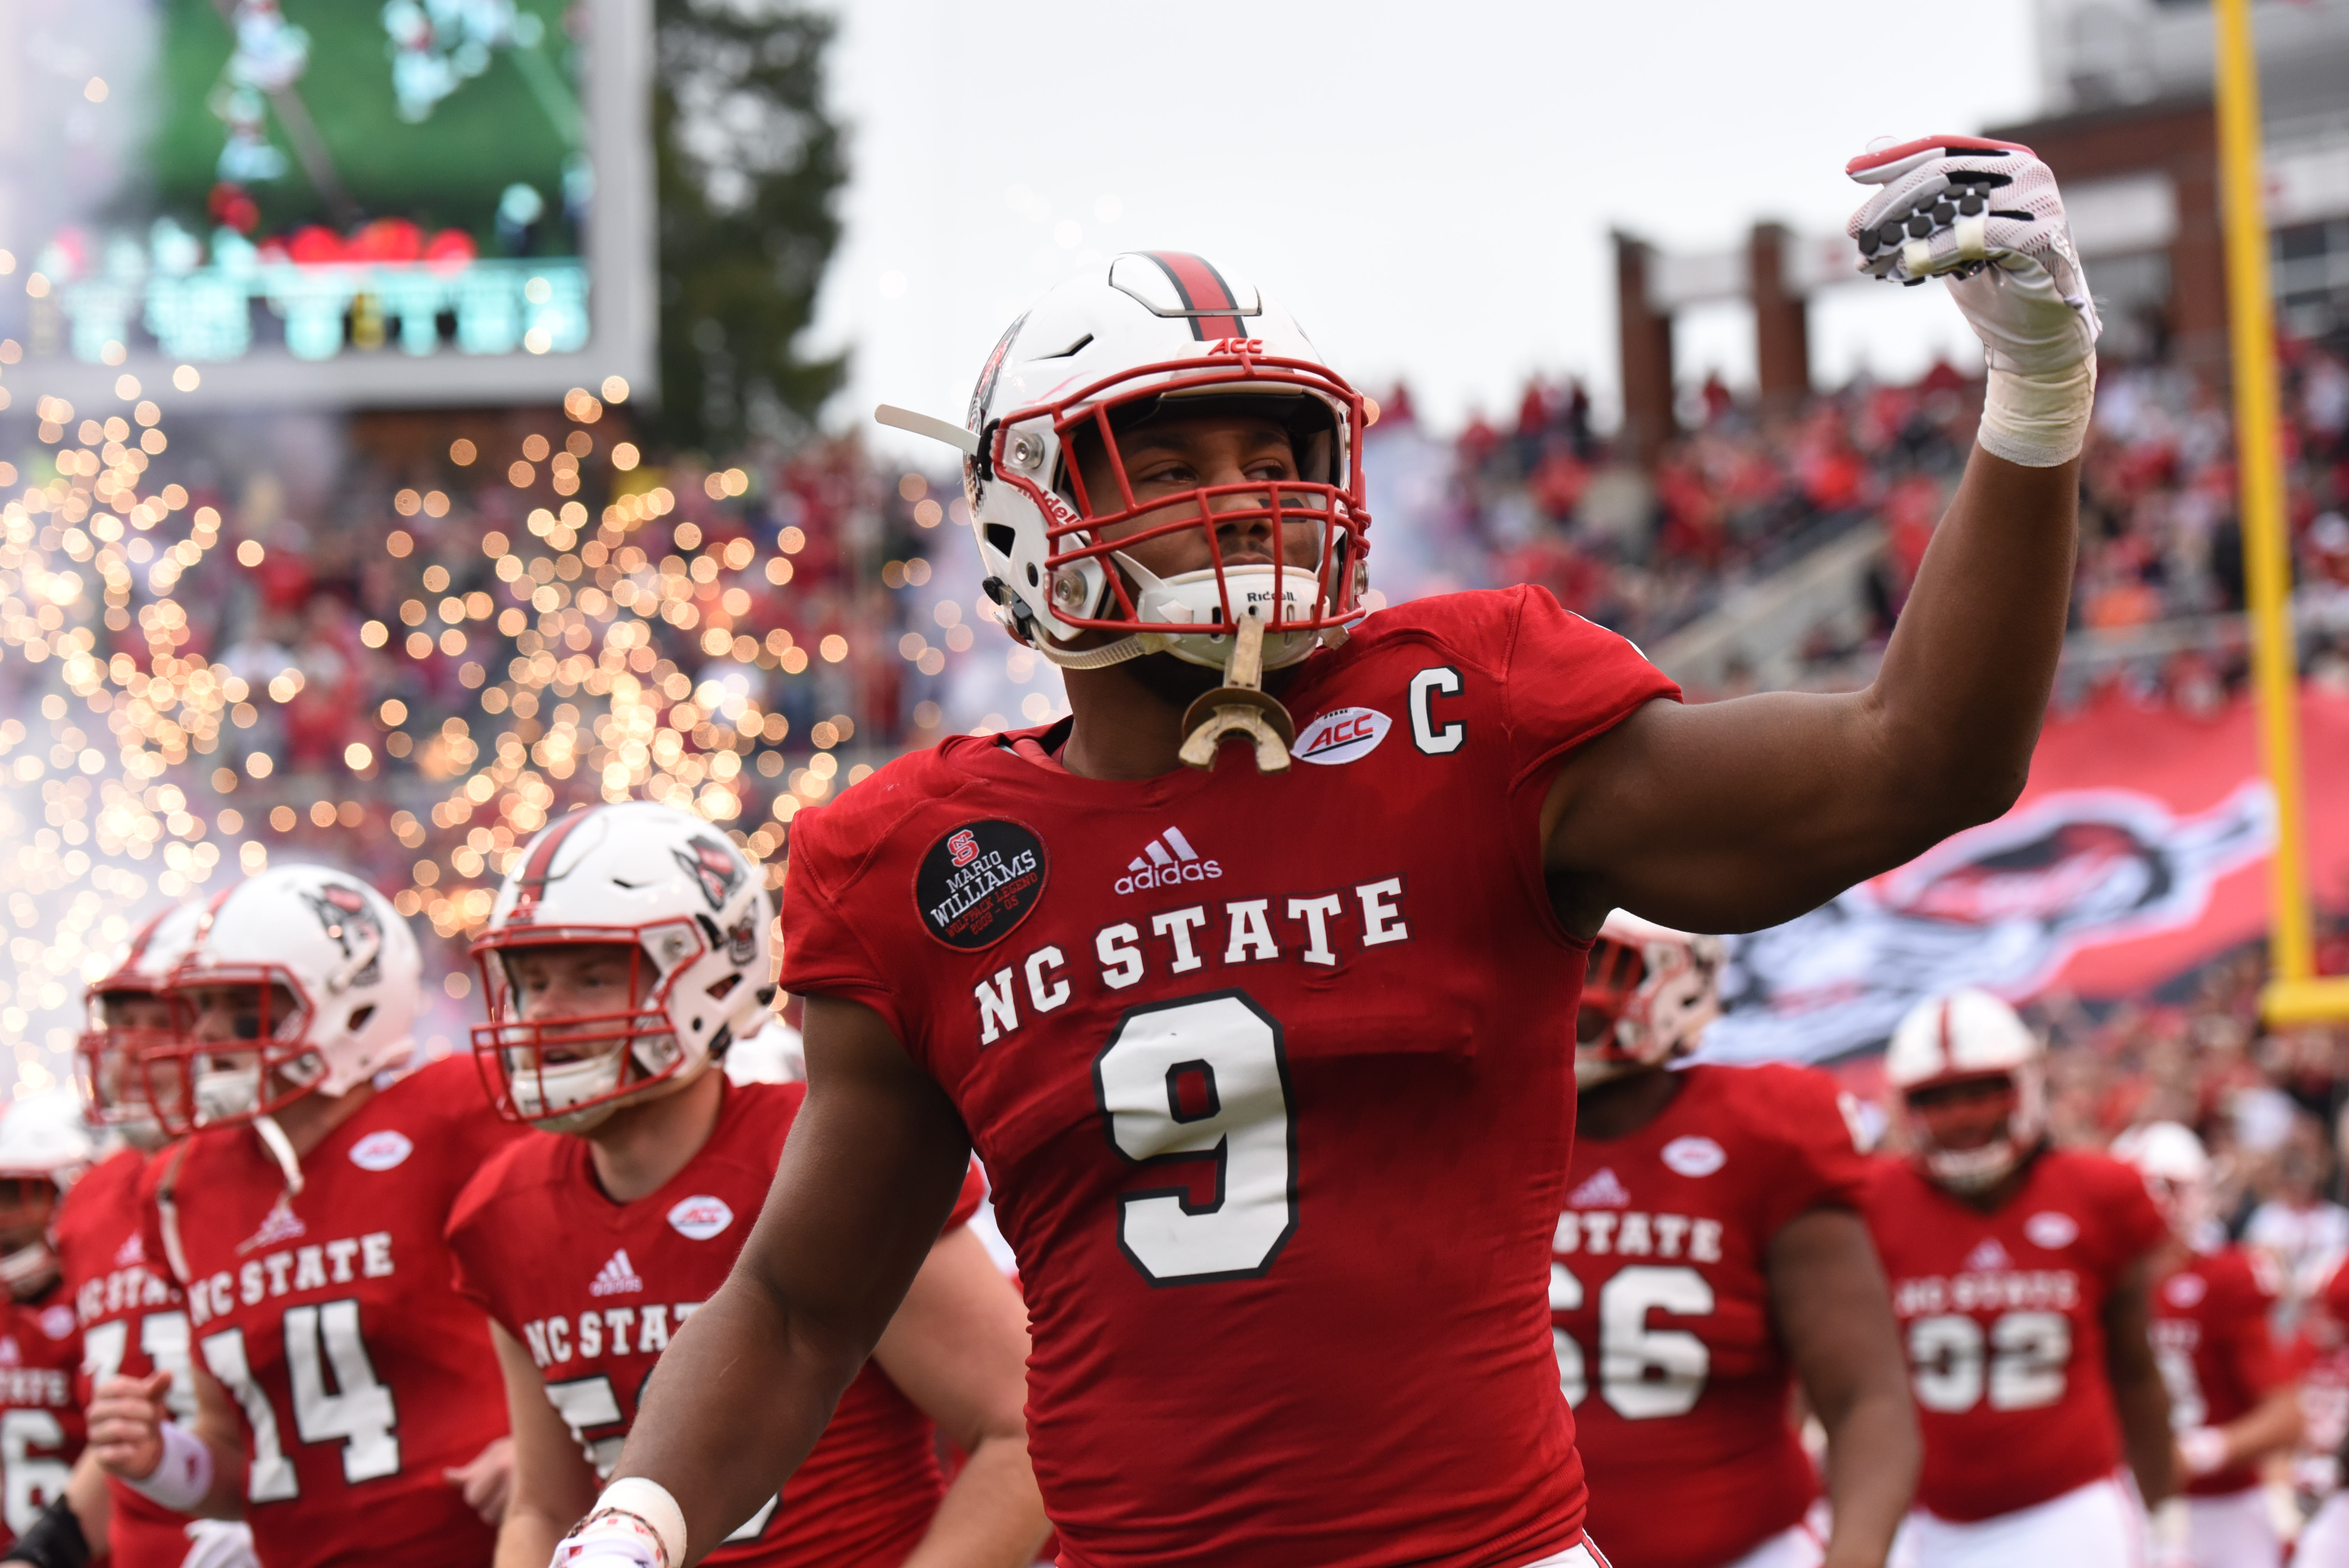 North Carolina State Wolfpack defensive end Bradley Chubb (9) enters the field before the game between the Clemson Tigers and the NC State Wolfpack on November 04, 2017 at Carter-Finley Stadium in Raleigh, NC. (Photo by William Howard/Icon Sportswire via Getty Images)